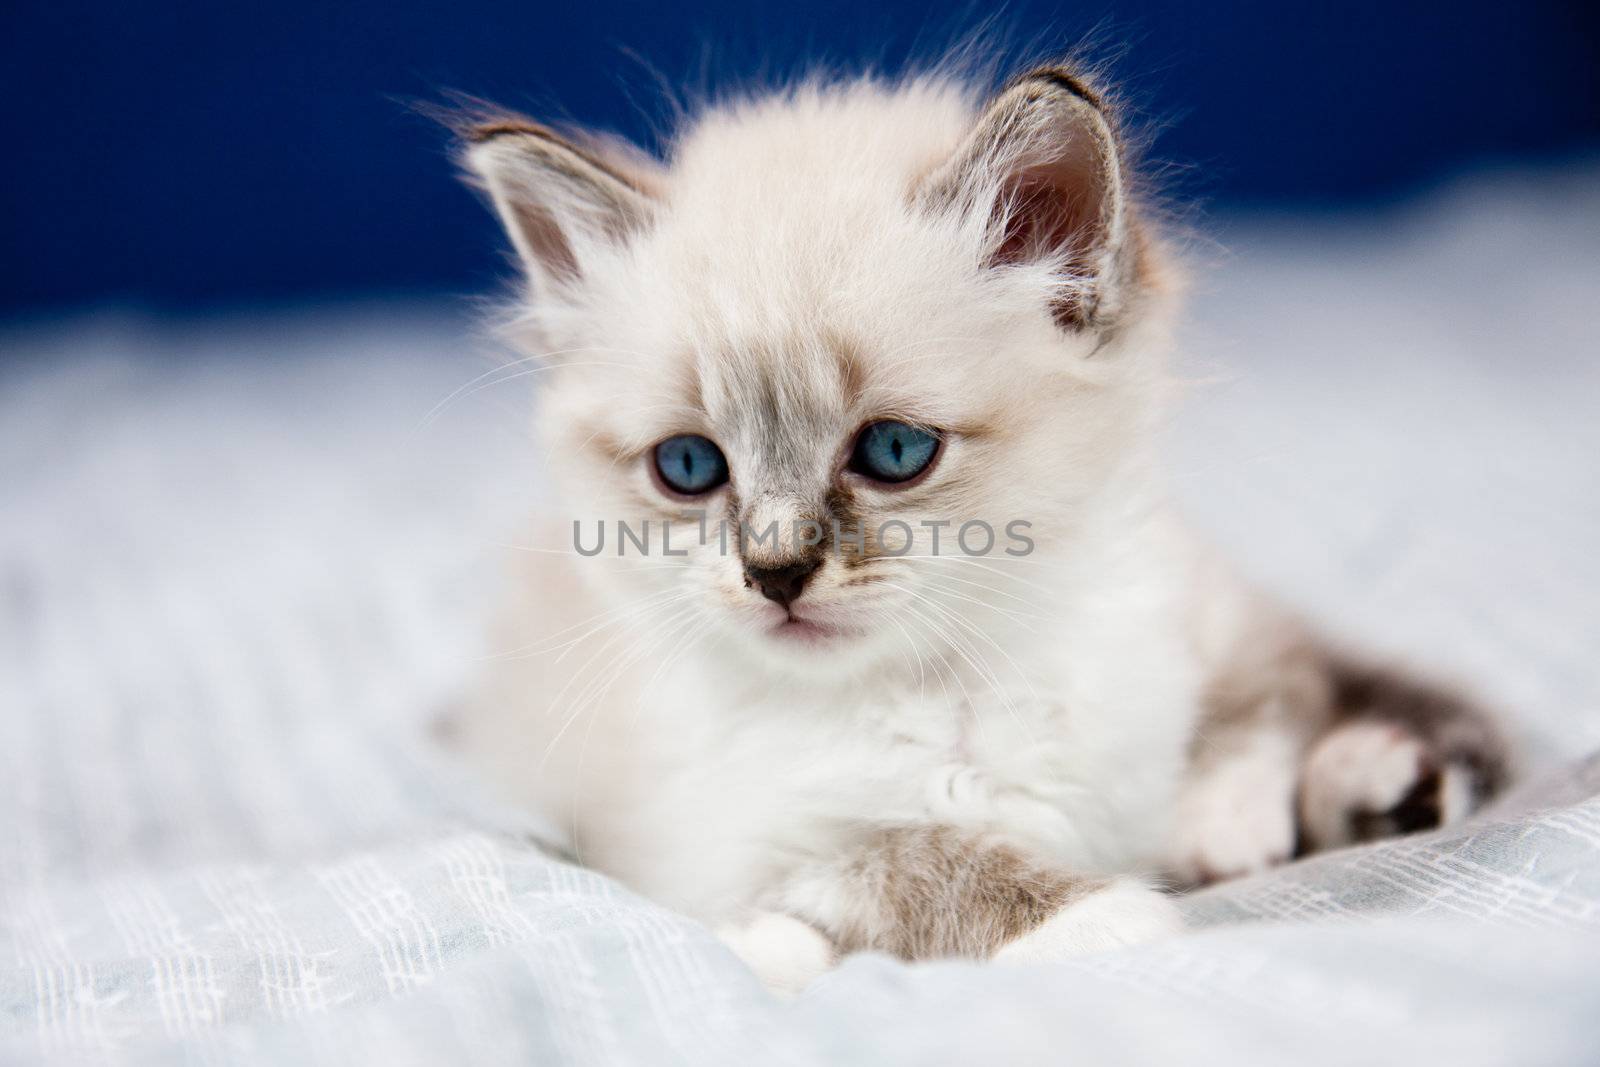 Portrait of a kitten with blue eyes, clear coat, lying on a bed sheet